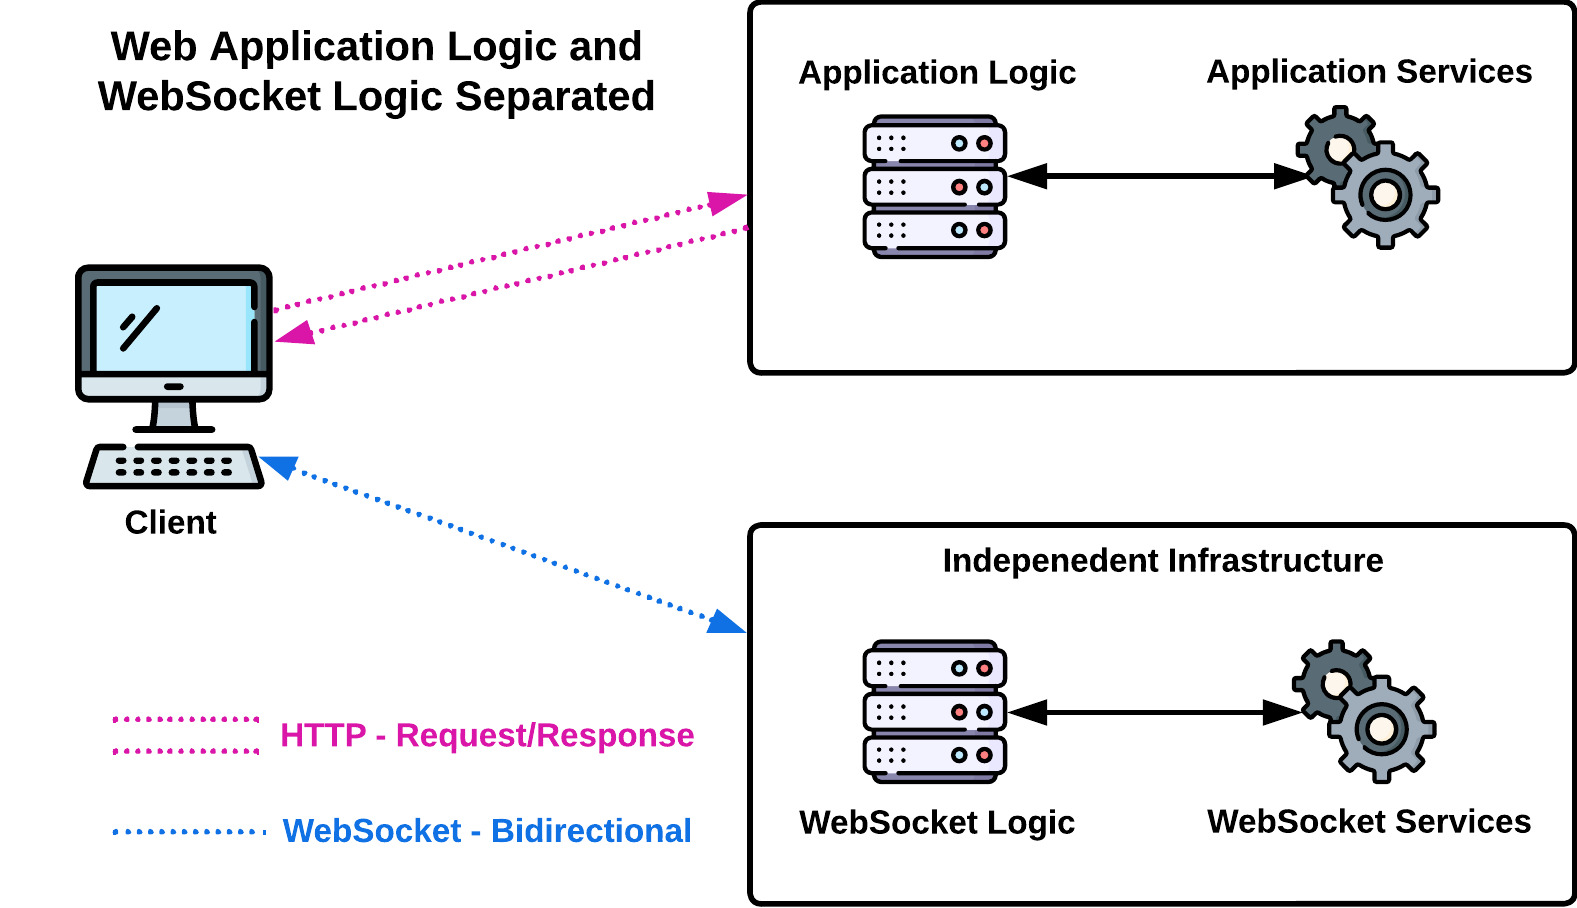 Diagram of web application and WebSocket application logic separated